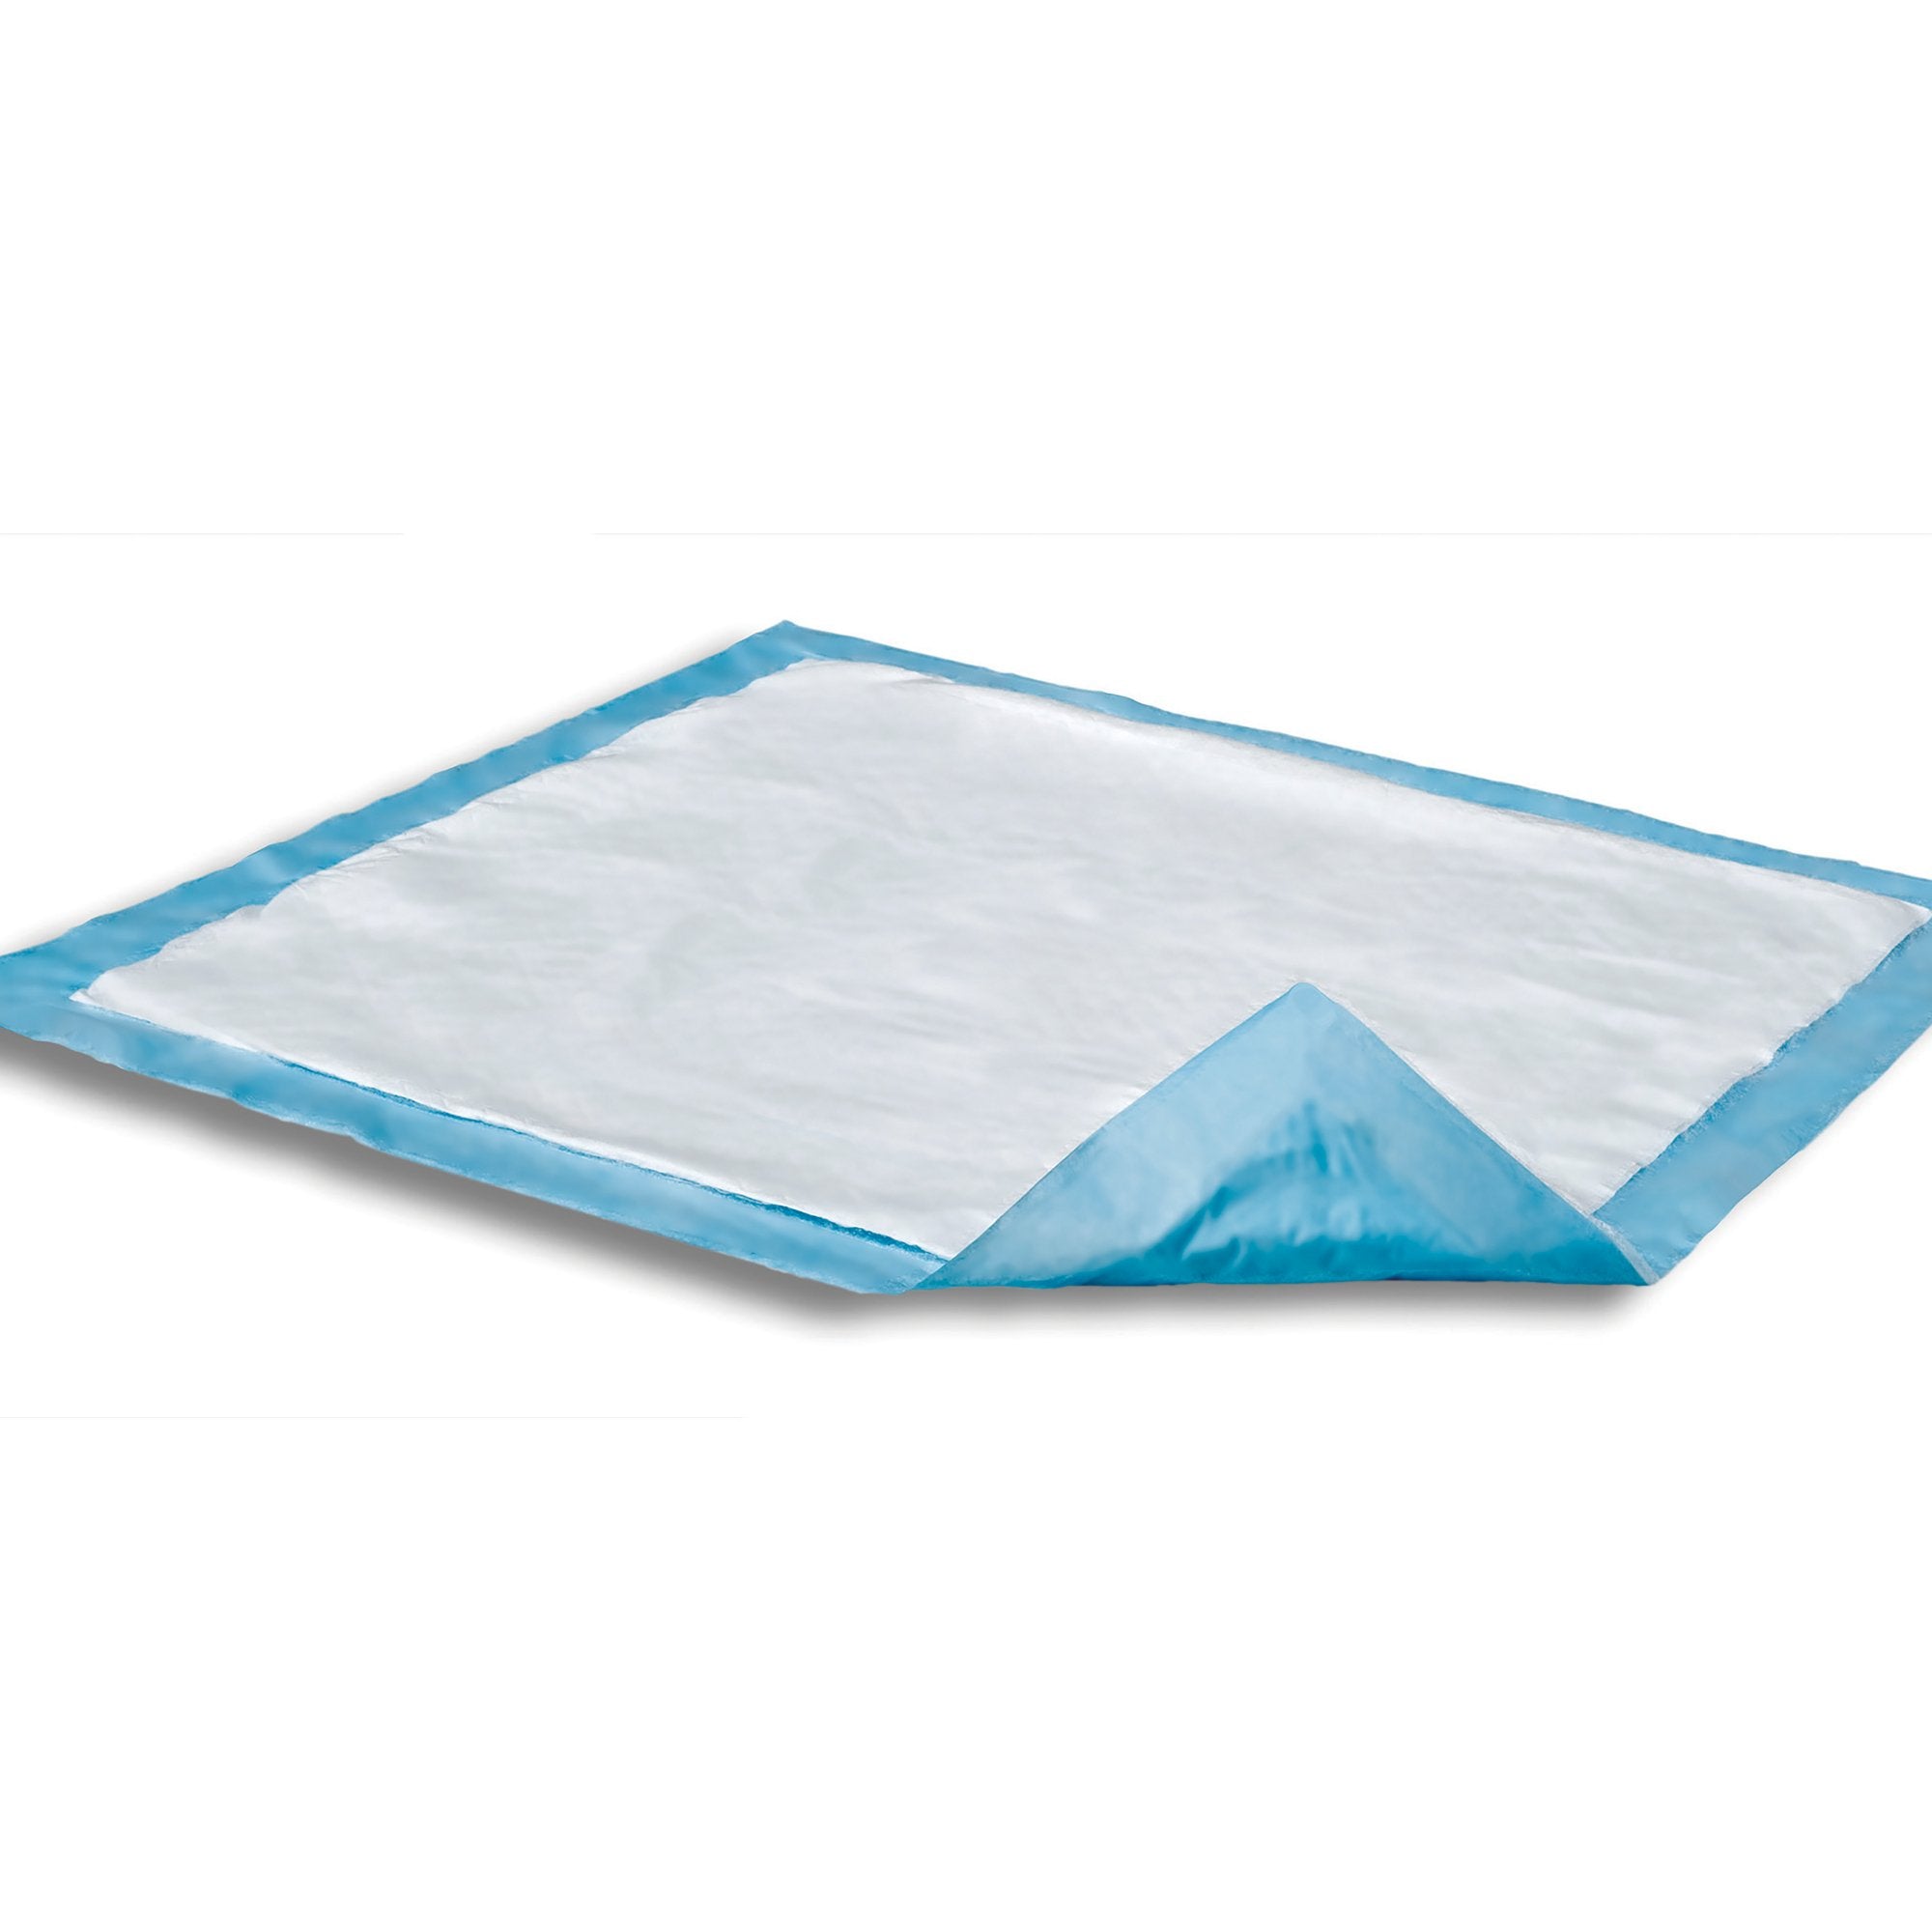 Disposable Underpad Attends® Care Dri-Sorb® 23 X 36 Inch Cellulose / Polymer Heavy Absorbency